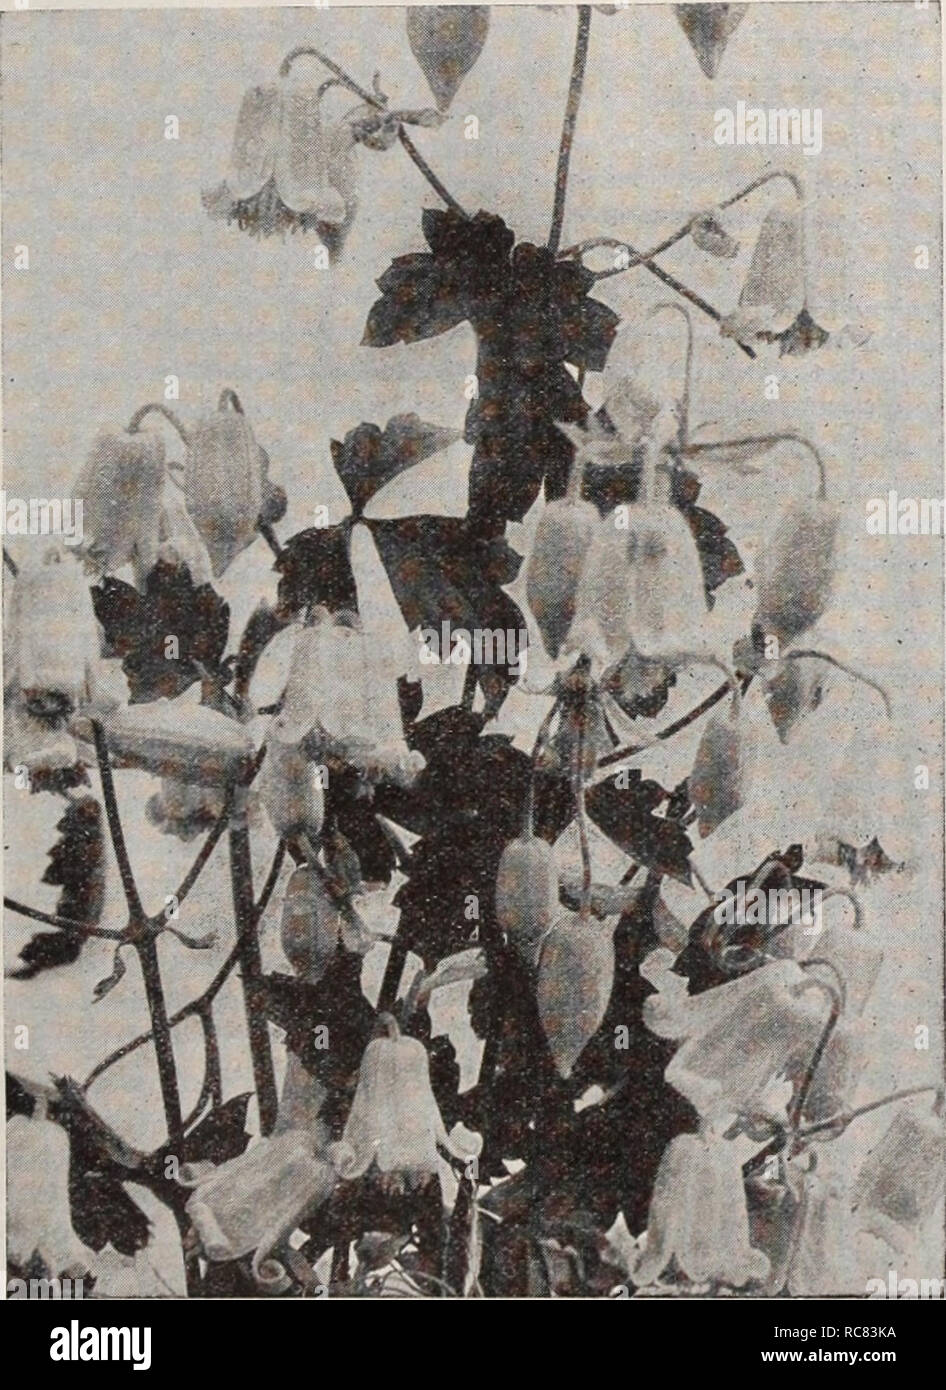 . Dreer's garden book / Henry A. Dreer.. Nursery Catalogue. i HARDY CLIMBING PLANTS ; PHlLADELPHlH 155 Large-Flowering Clematis No other climbing plant enjoys the widespread popularity as the beauti- ful large-flowering varieties of Clematis. They do well in a fertile light loamy soil which is well drained. They climb with ease and will grow more than ten feet in height. Duchess of Edinburgh. Elegant large double white blooms. Henryi. Lovely, large, creamy white blooms. Jackmani. This is the very popular rich purple Clematis. Mme. Edouard Andre. Large bright rosy carmine blooms. Any of the abo Stock Photo